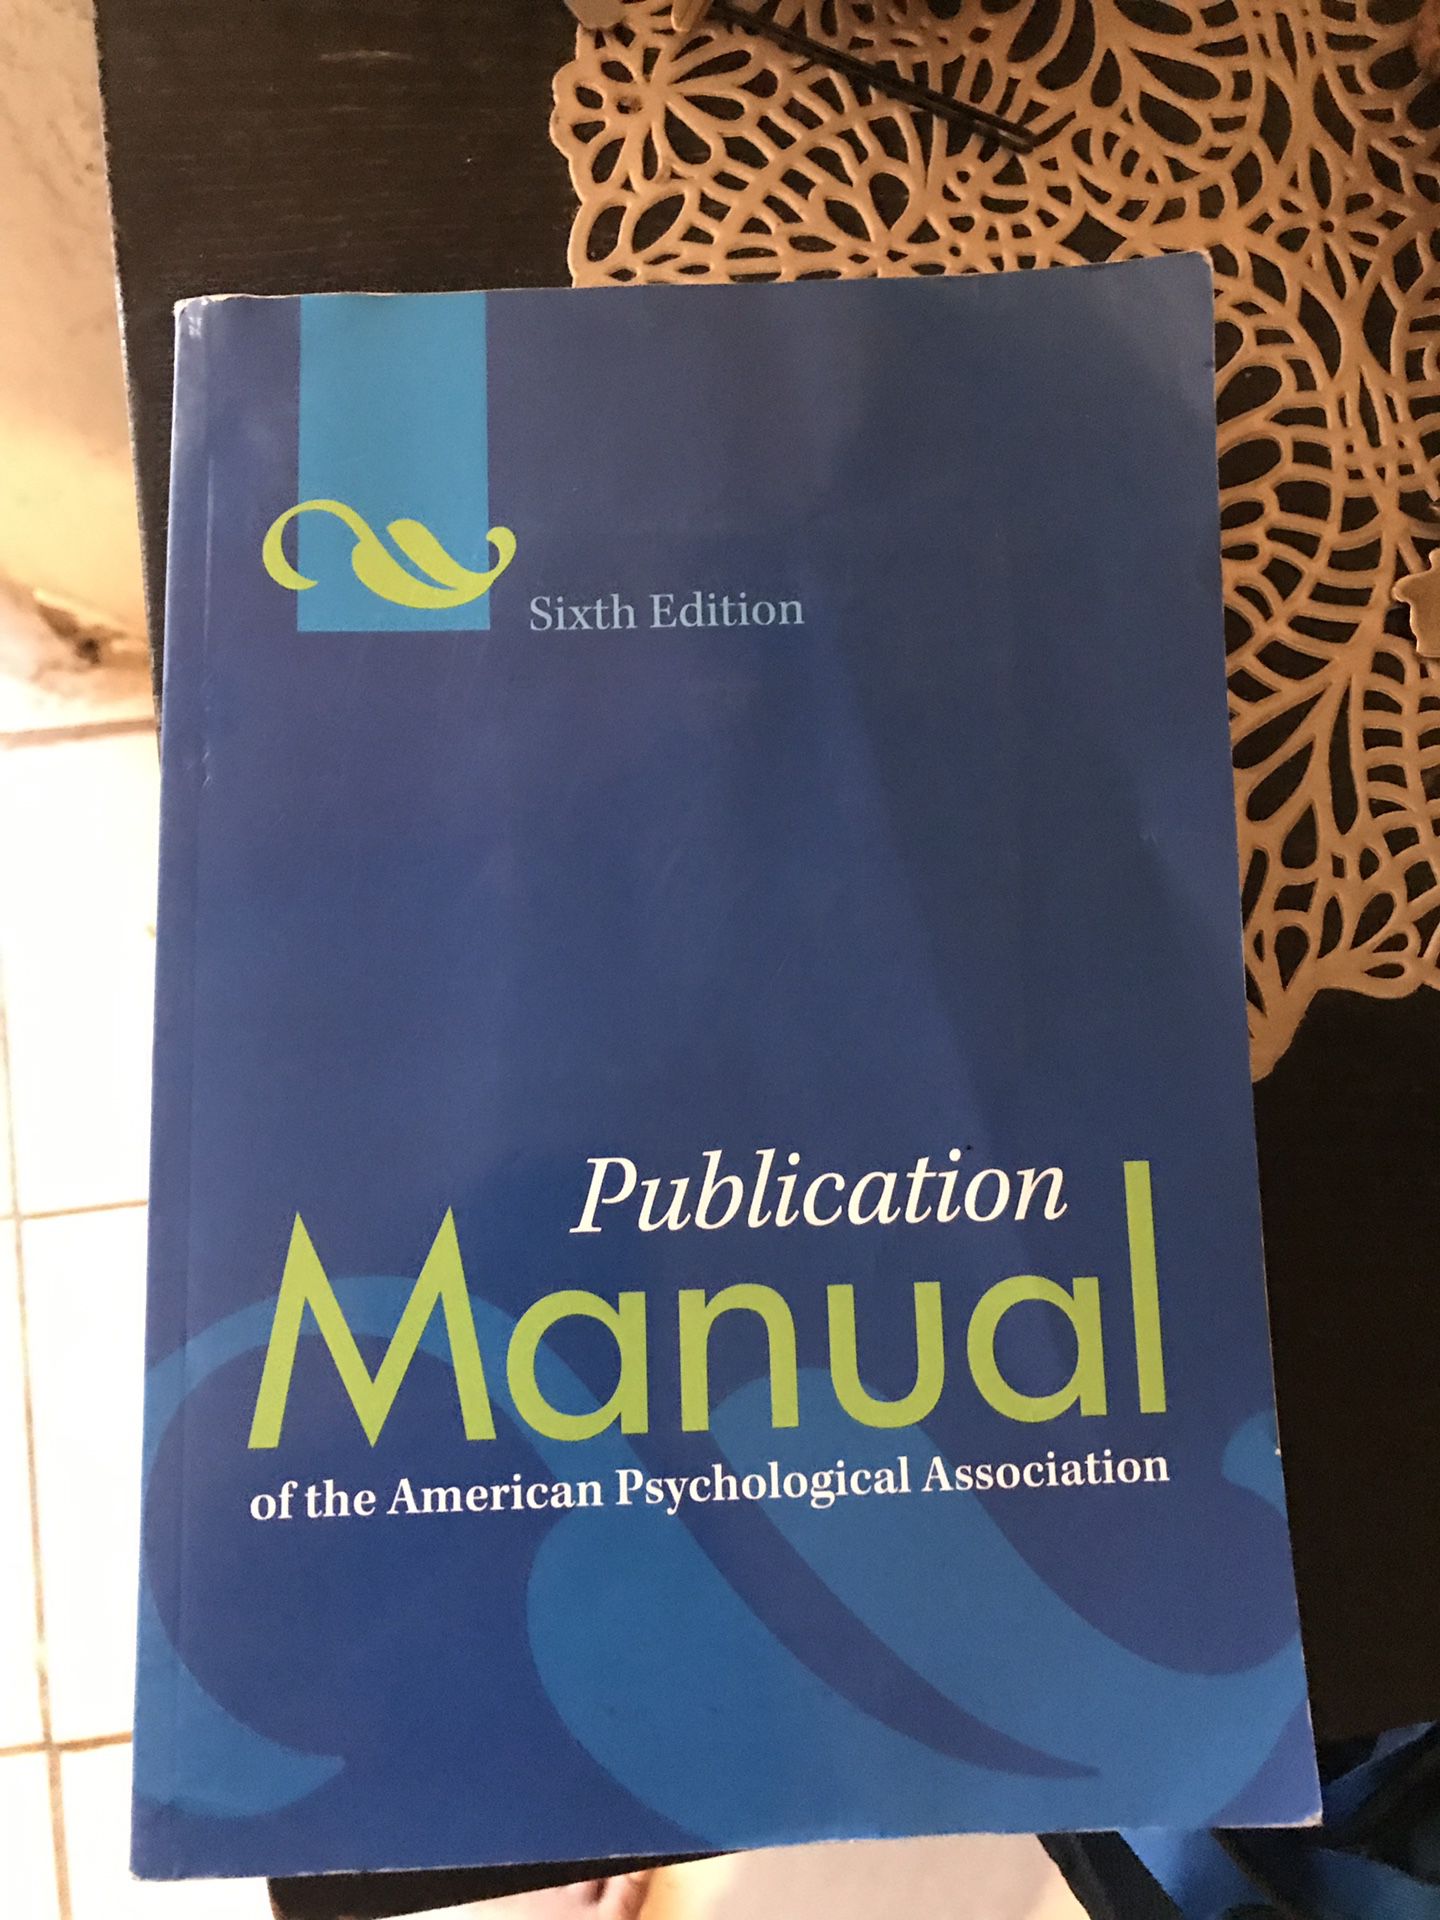 Publication manual of the American psychological association (6th edition)